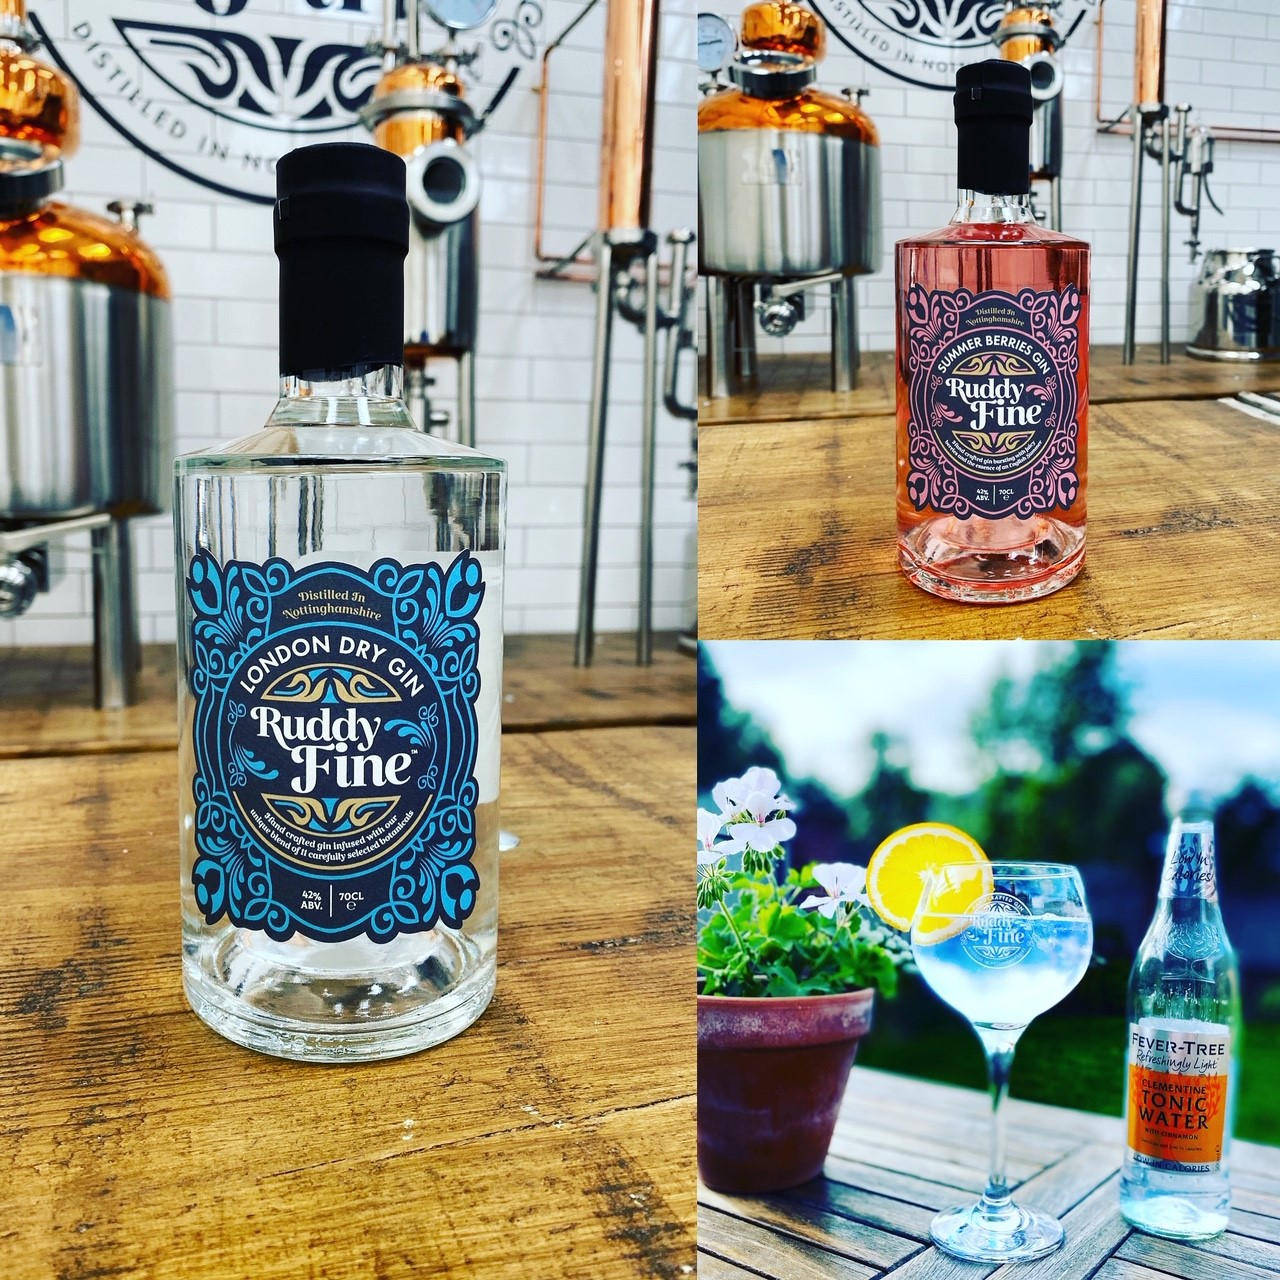 WIN YOUR OWN BRANDED ARTISAN GIN!